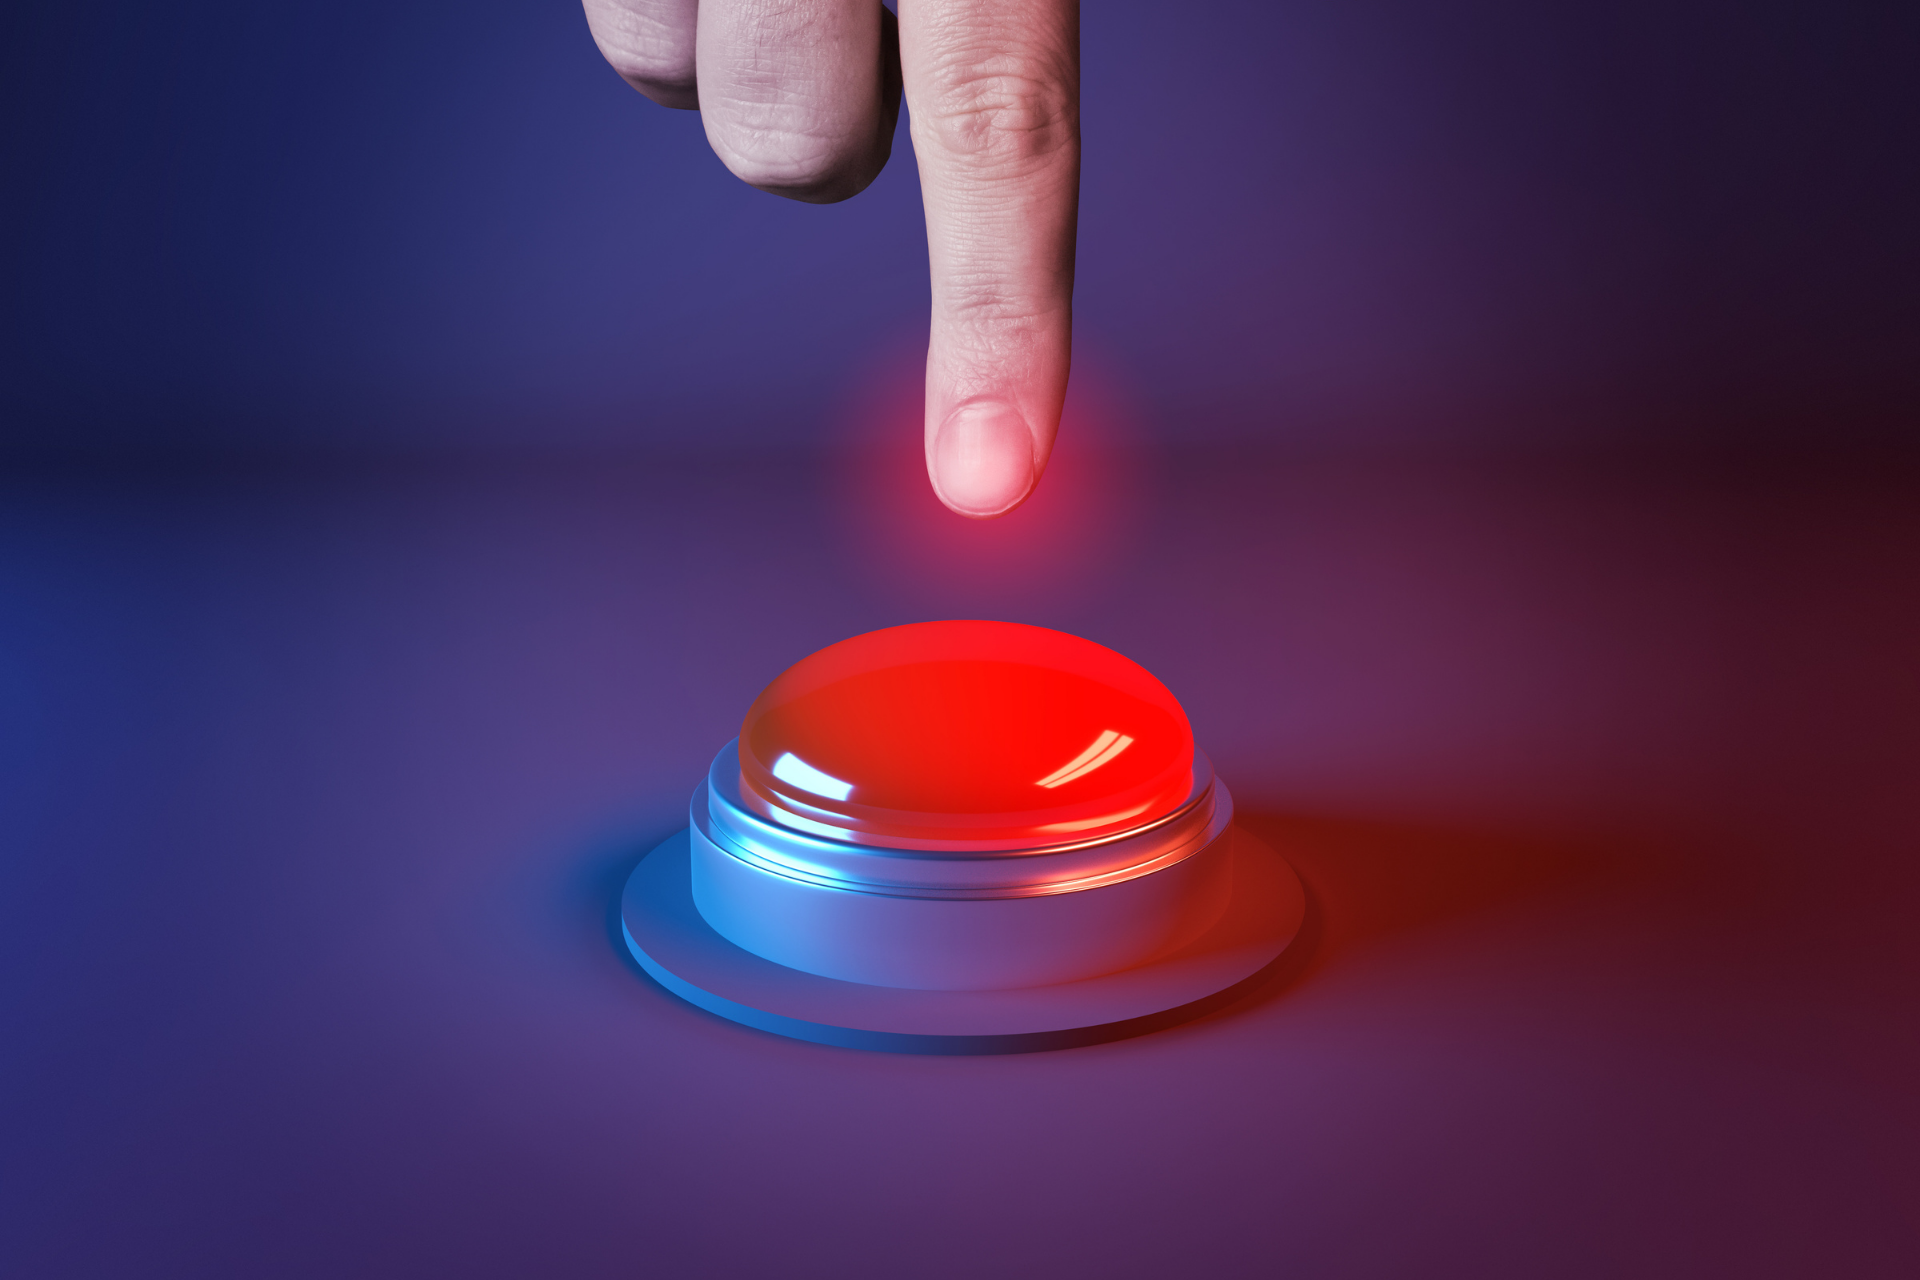 Index finger pressing a big red button
